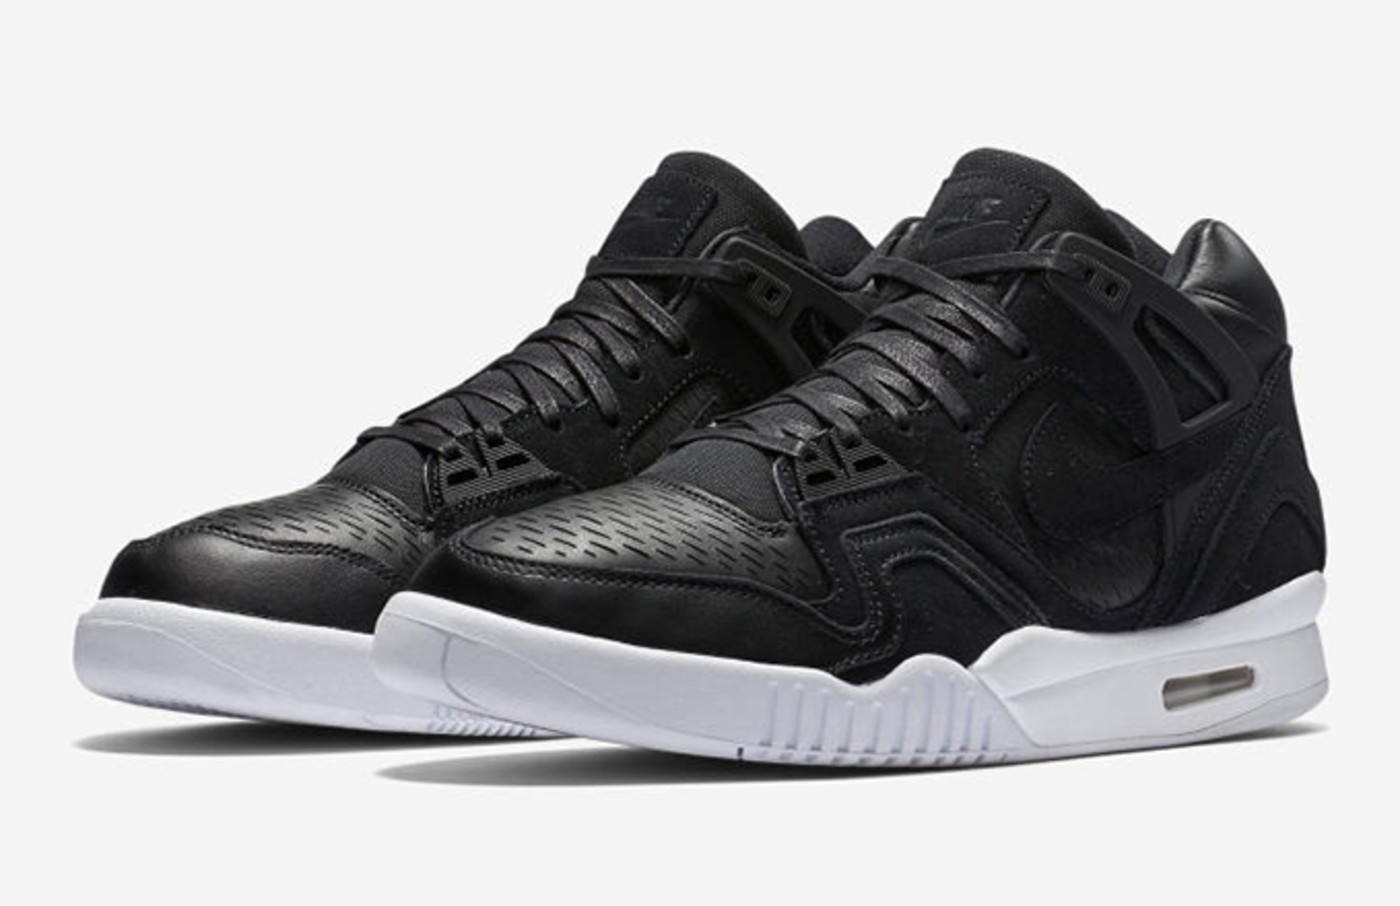 The Nike Air Tech II Gets the Laser |